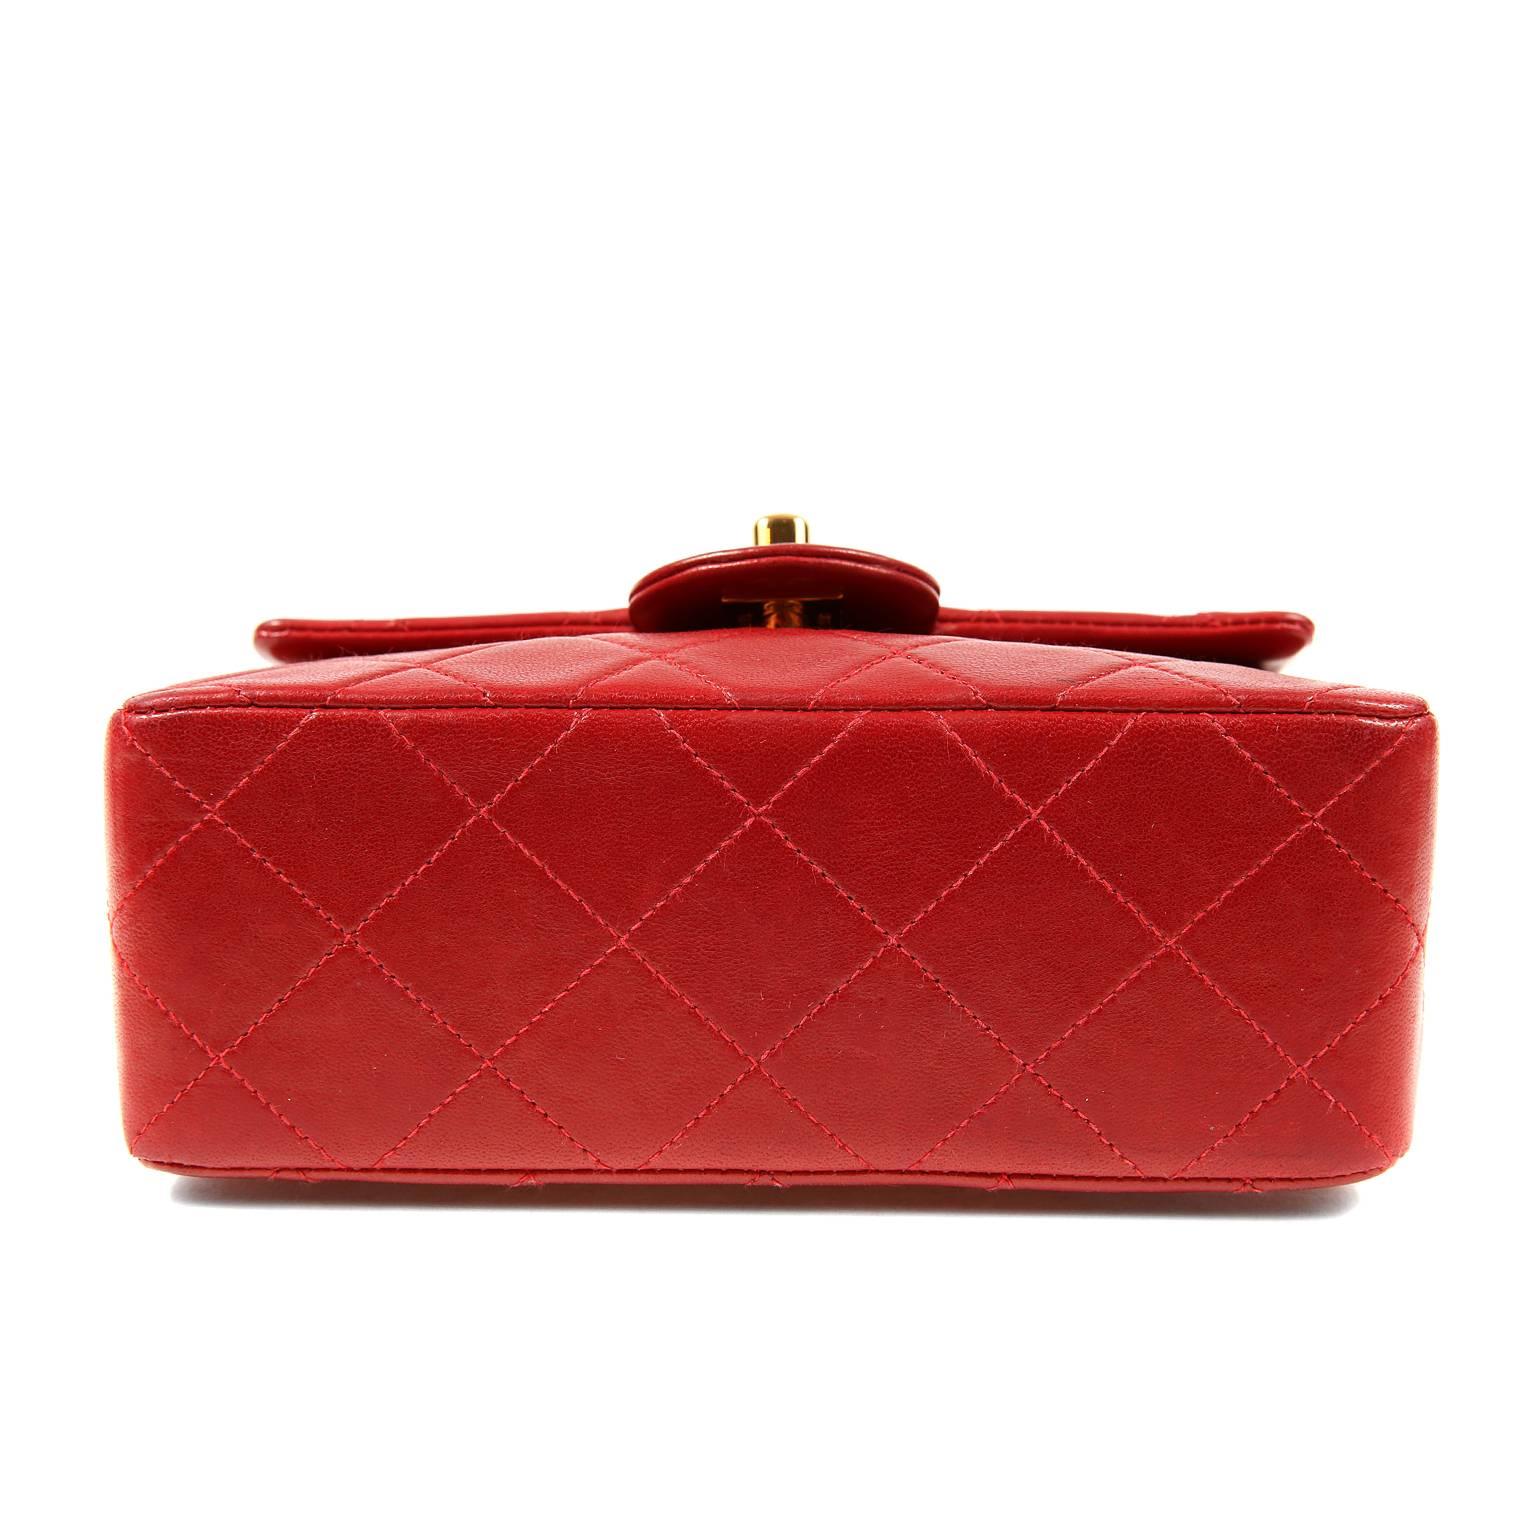 Women's Chanel Red Lambskin Mini Classic Flap bag with GHW